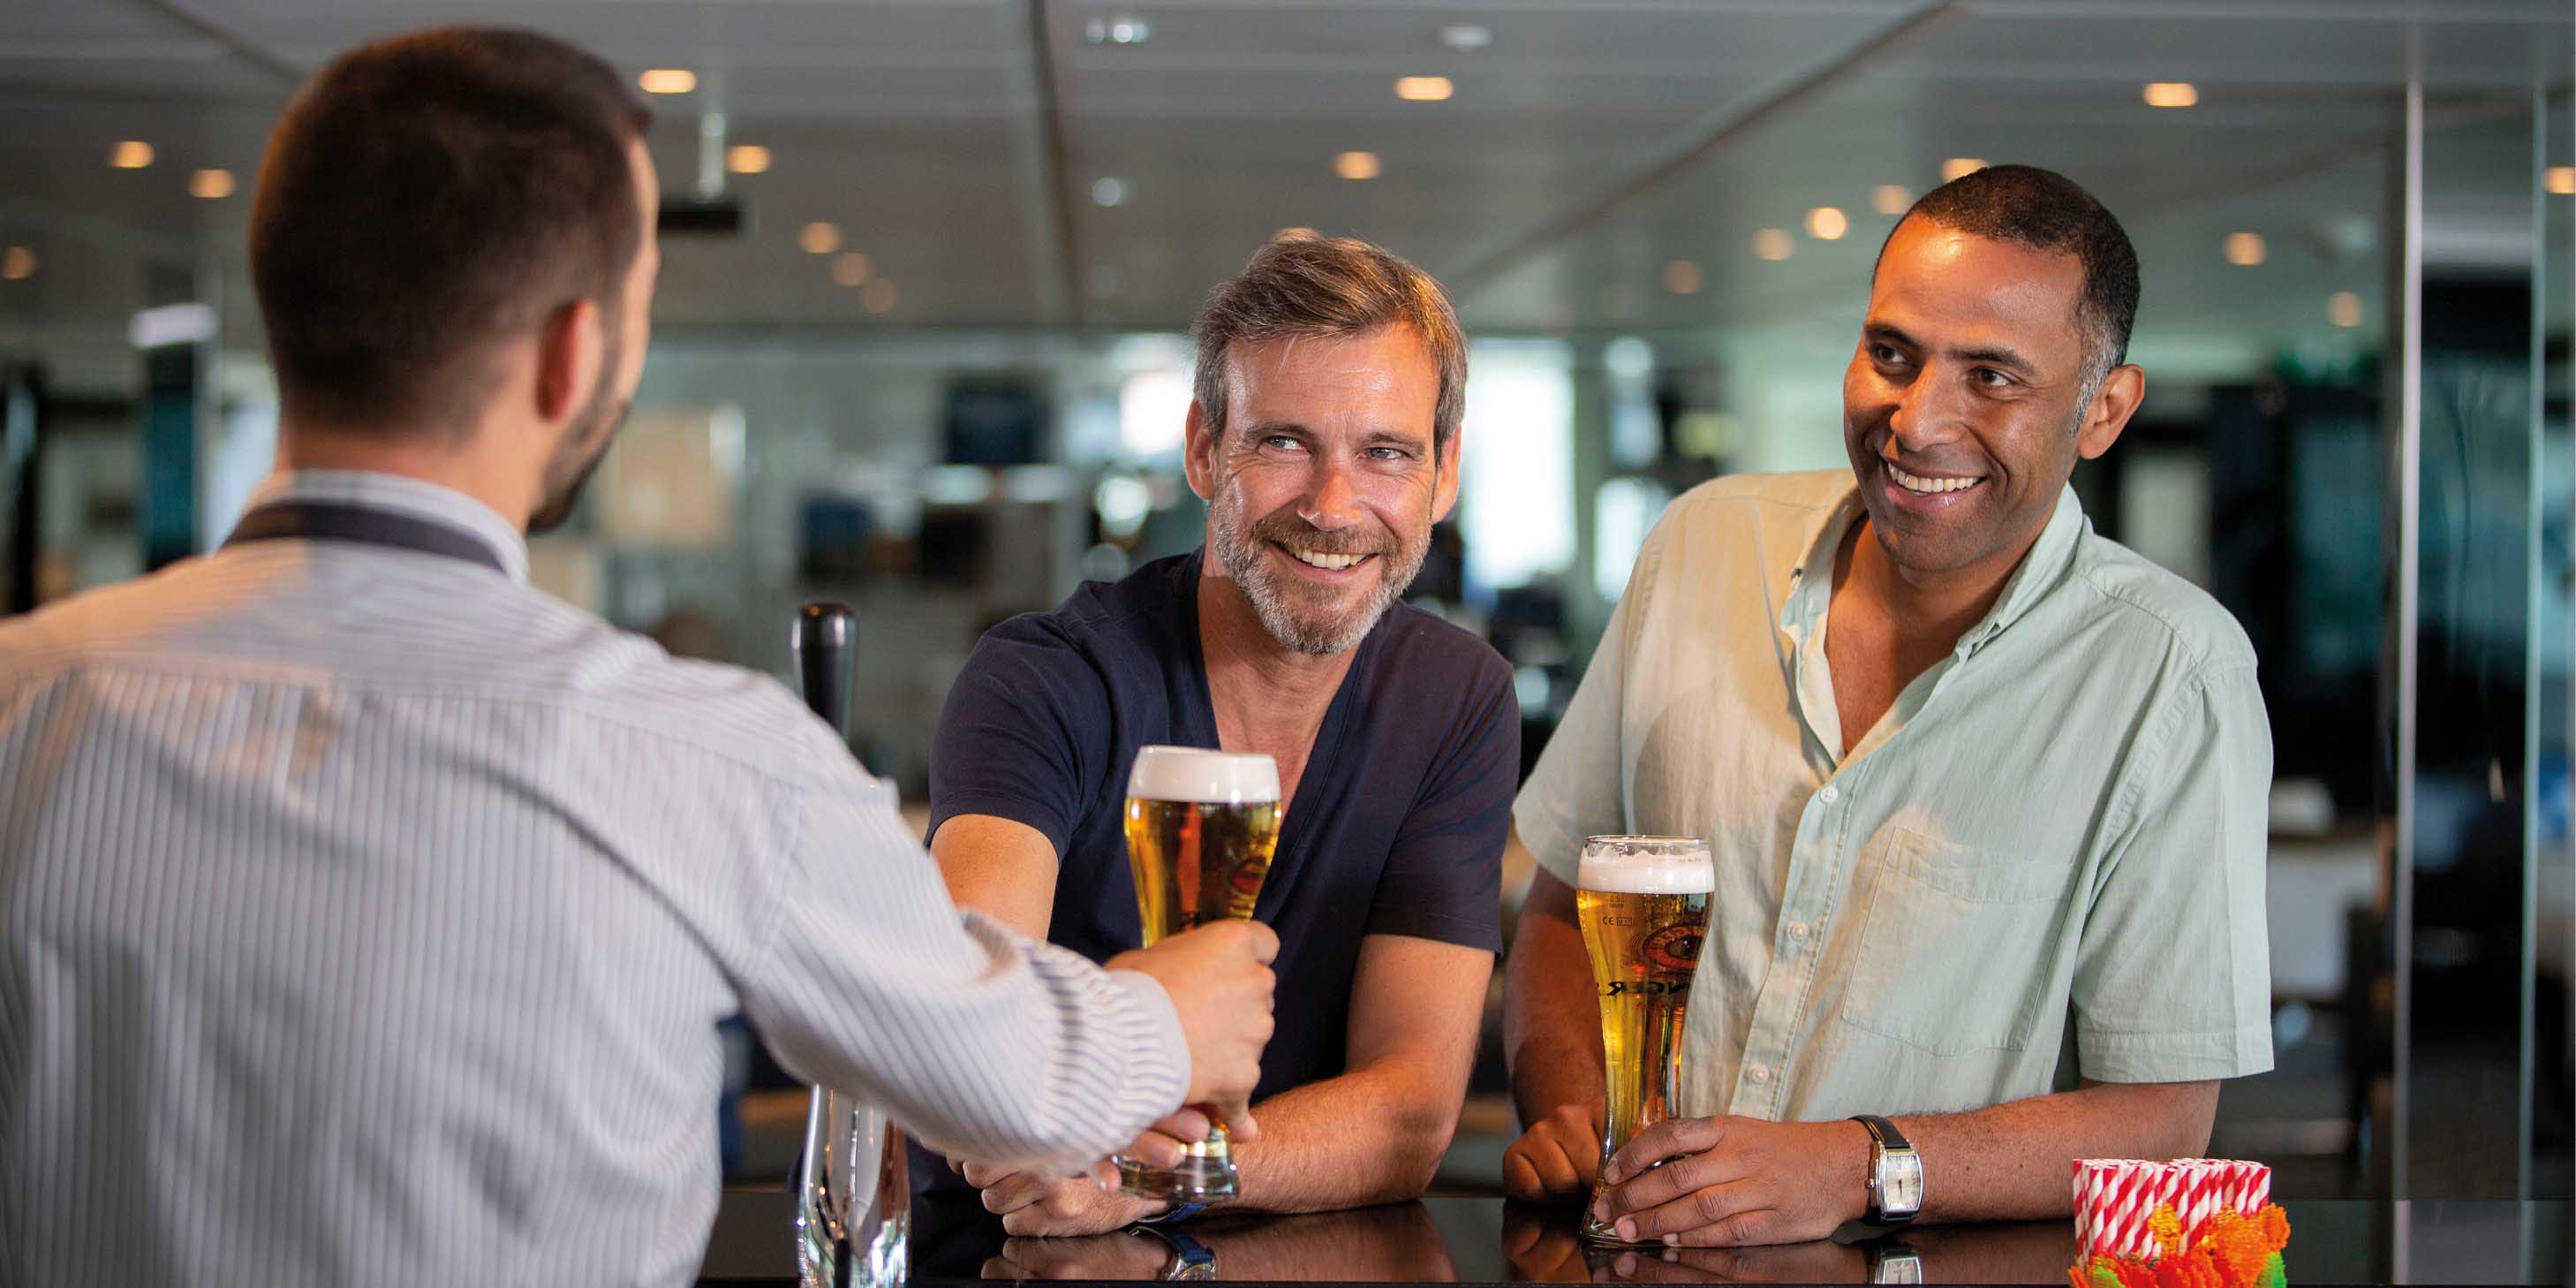 Two men smiling at a bartender, as he serves them beer at the bar 